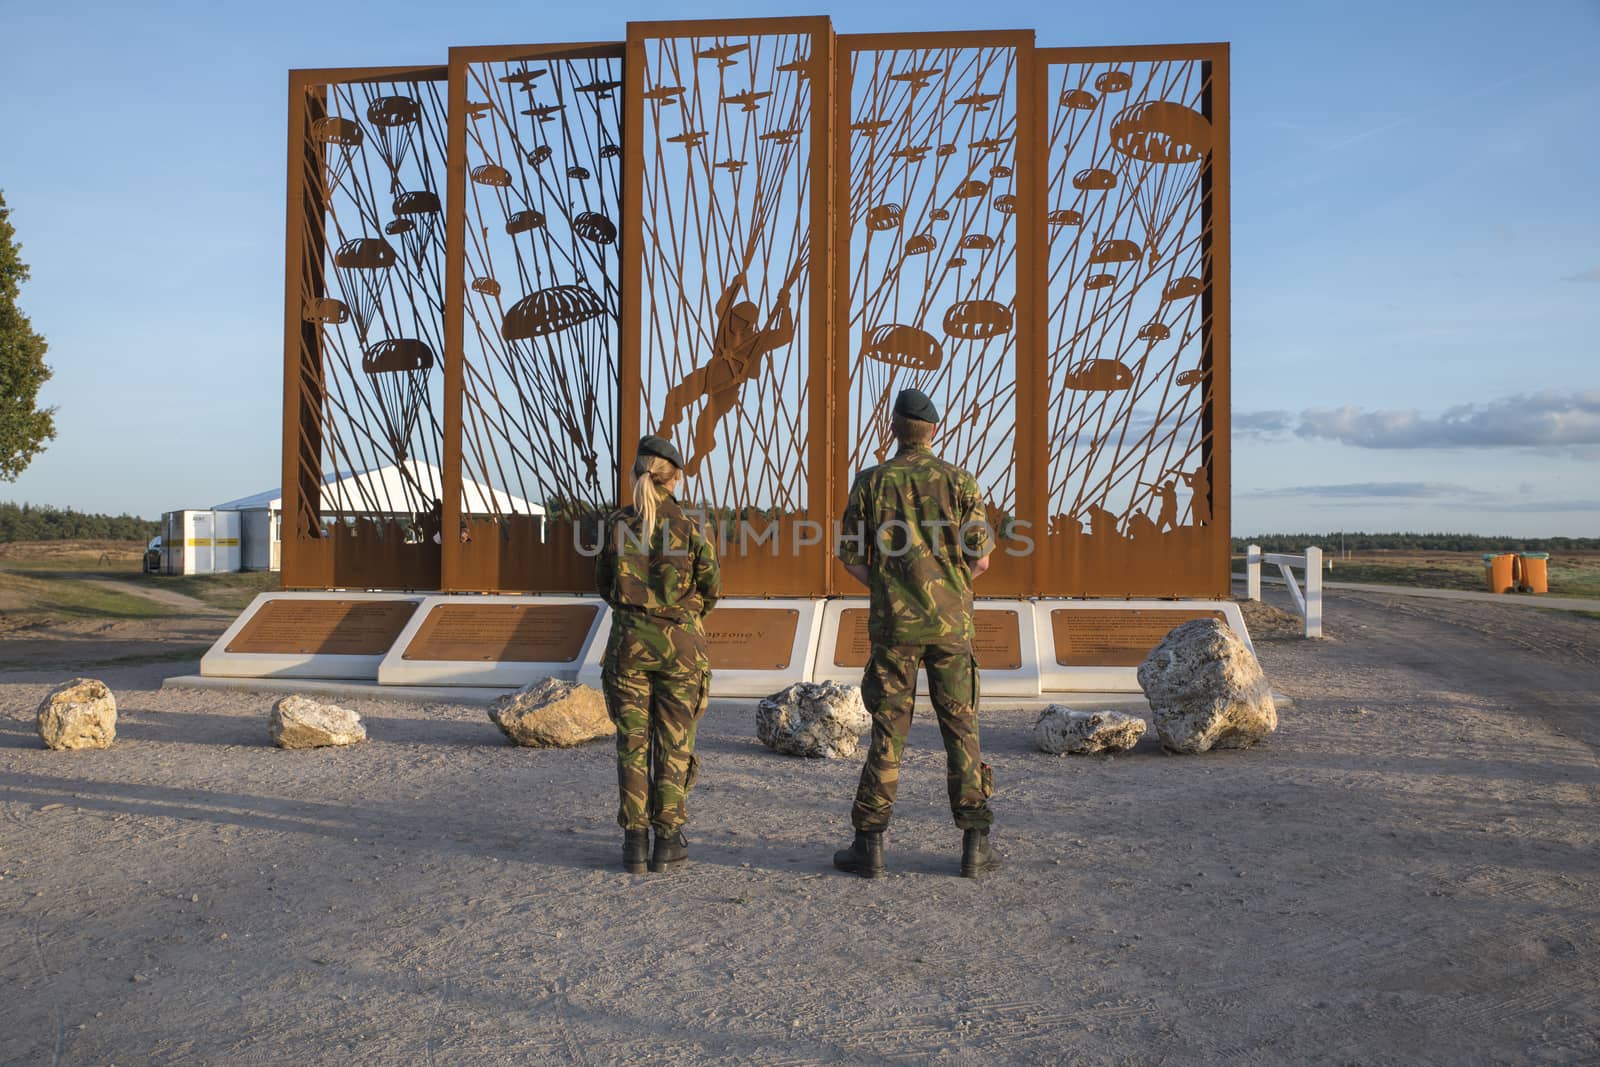 Ede,19-sept-2019: Soldiers at the new monument on the Ginkel heath, windows of the past.Colen's design marks the place where the Allied parachutists landed in 1944 to contribute to the liberation of the Netherlands